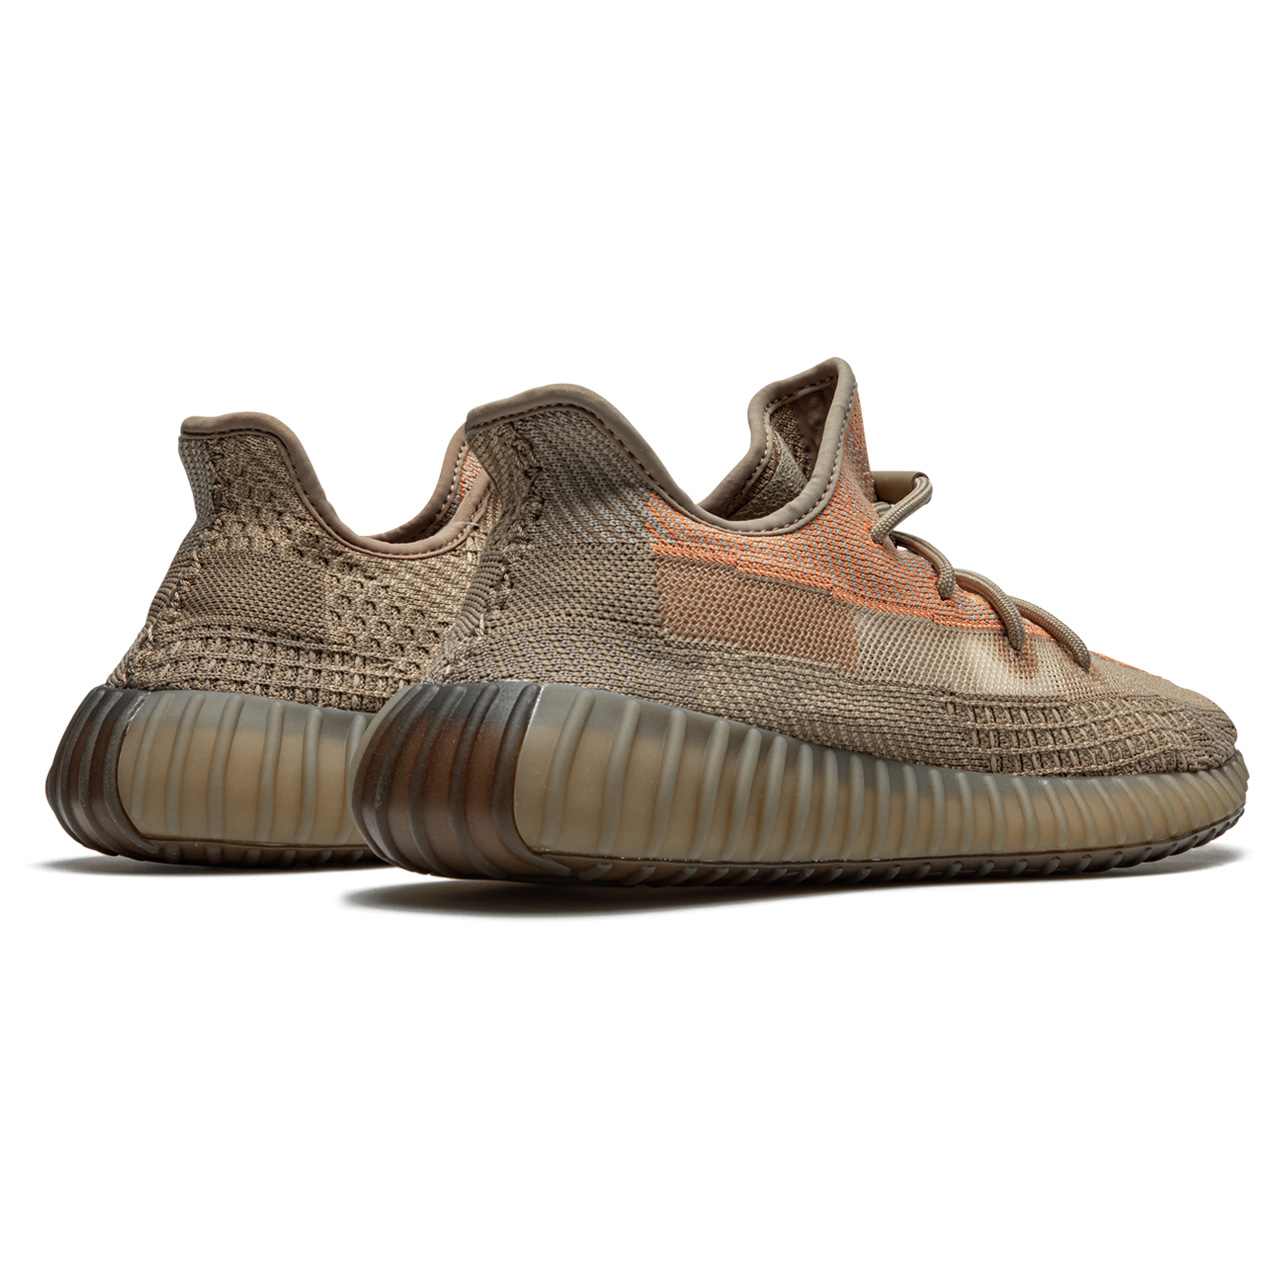 Adidas Yeezy Boost 350 V2 Sand Taupe - DS Kicks